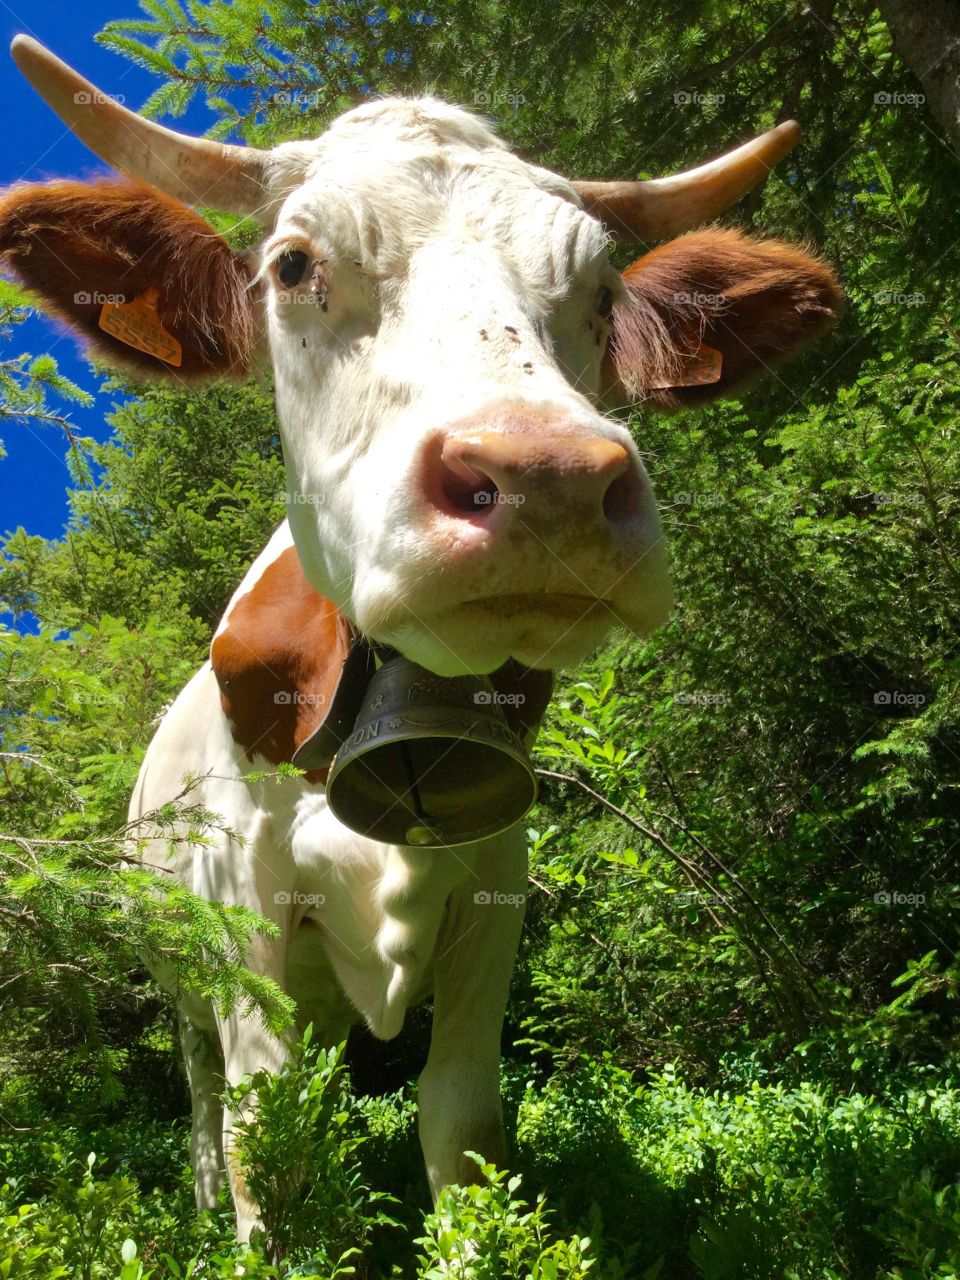 The curious cow